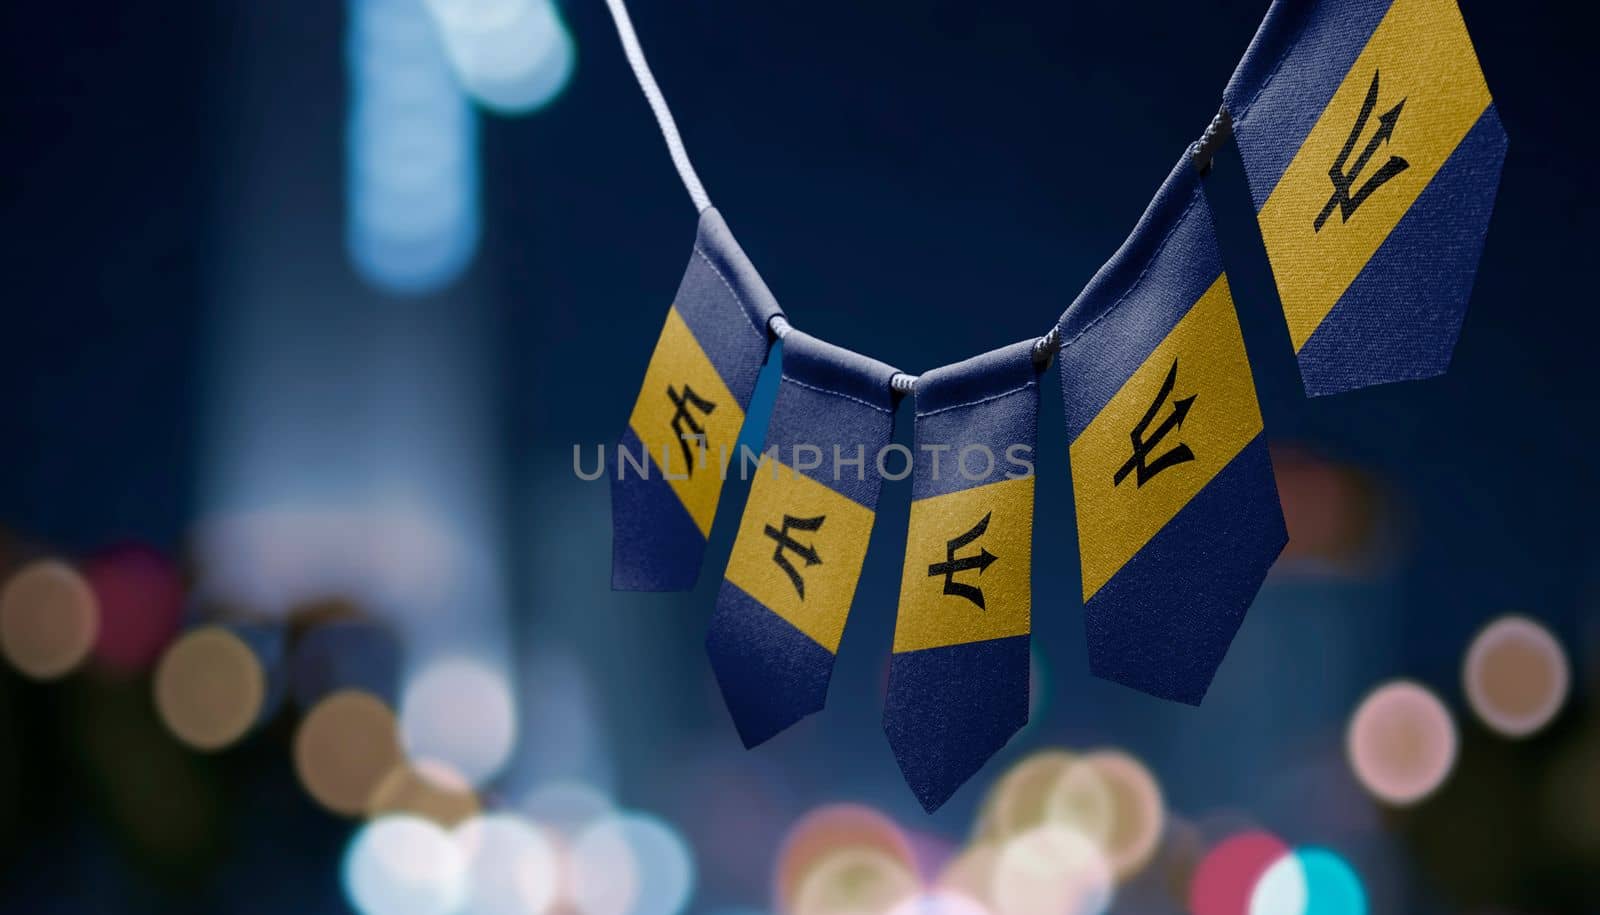 A garland of Barbados national flags on an abstract blurred background by butenkow